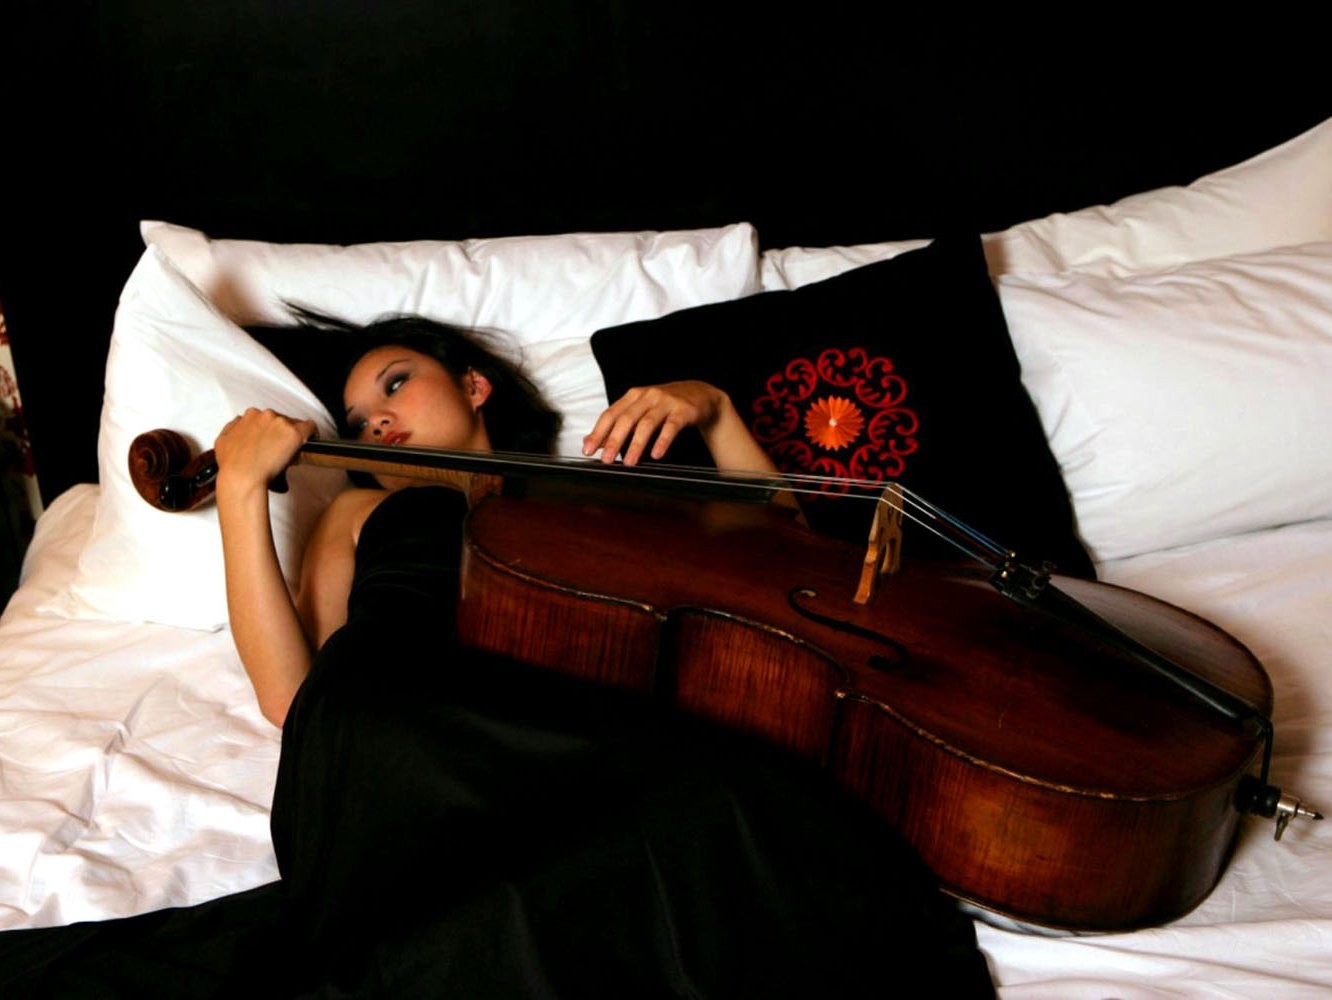 Cello Women In Bed Musical Instrument Asian 1332x1000